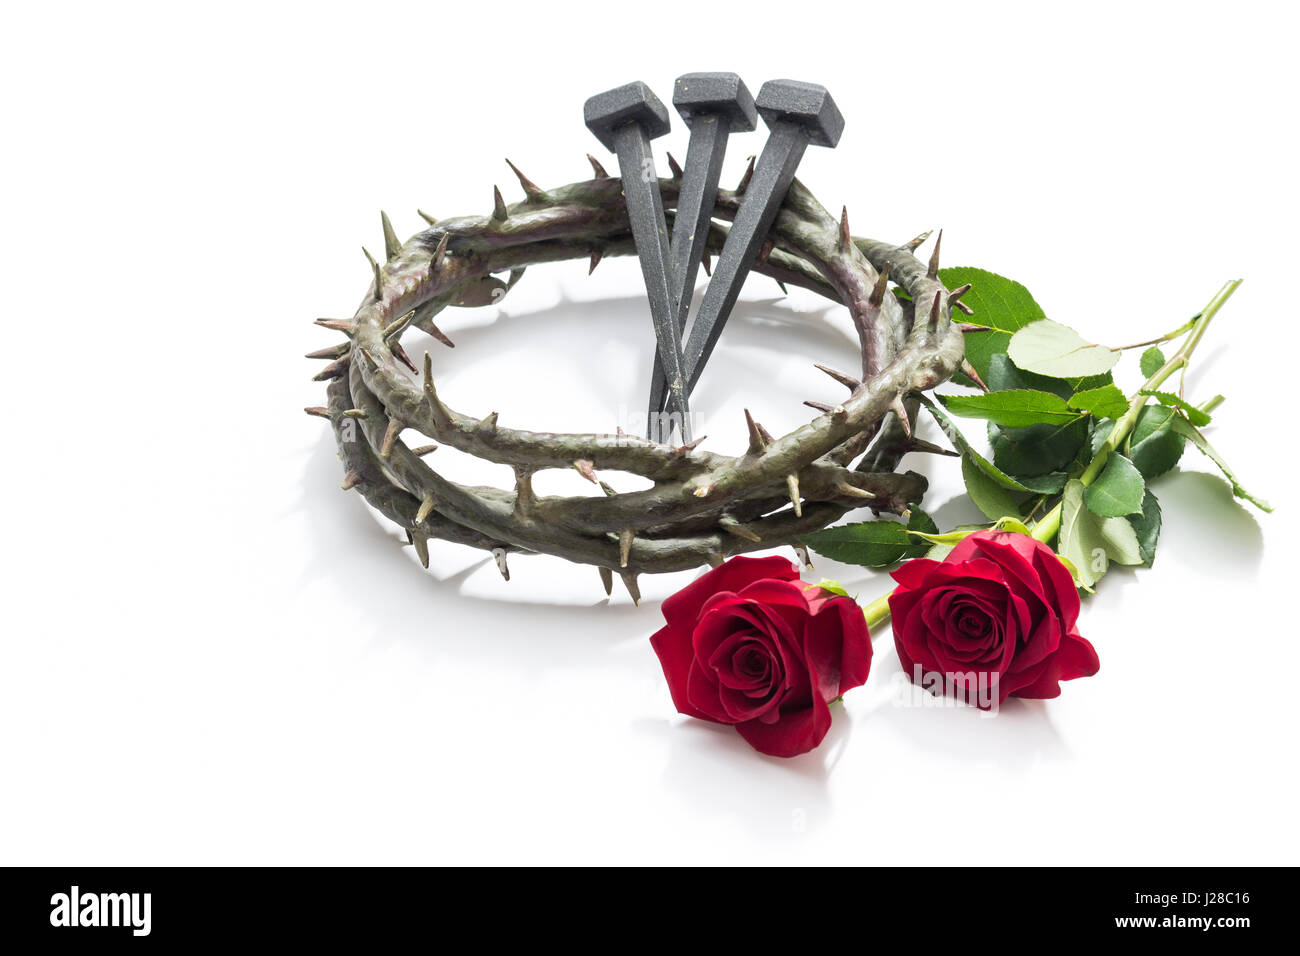 Jesus Christ crown of thorns, nails and two roses on a white background. Stock Photo